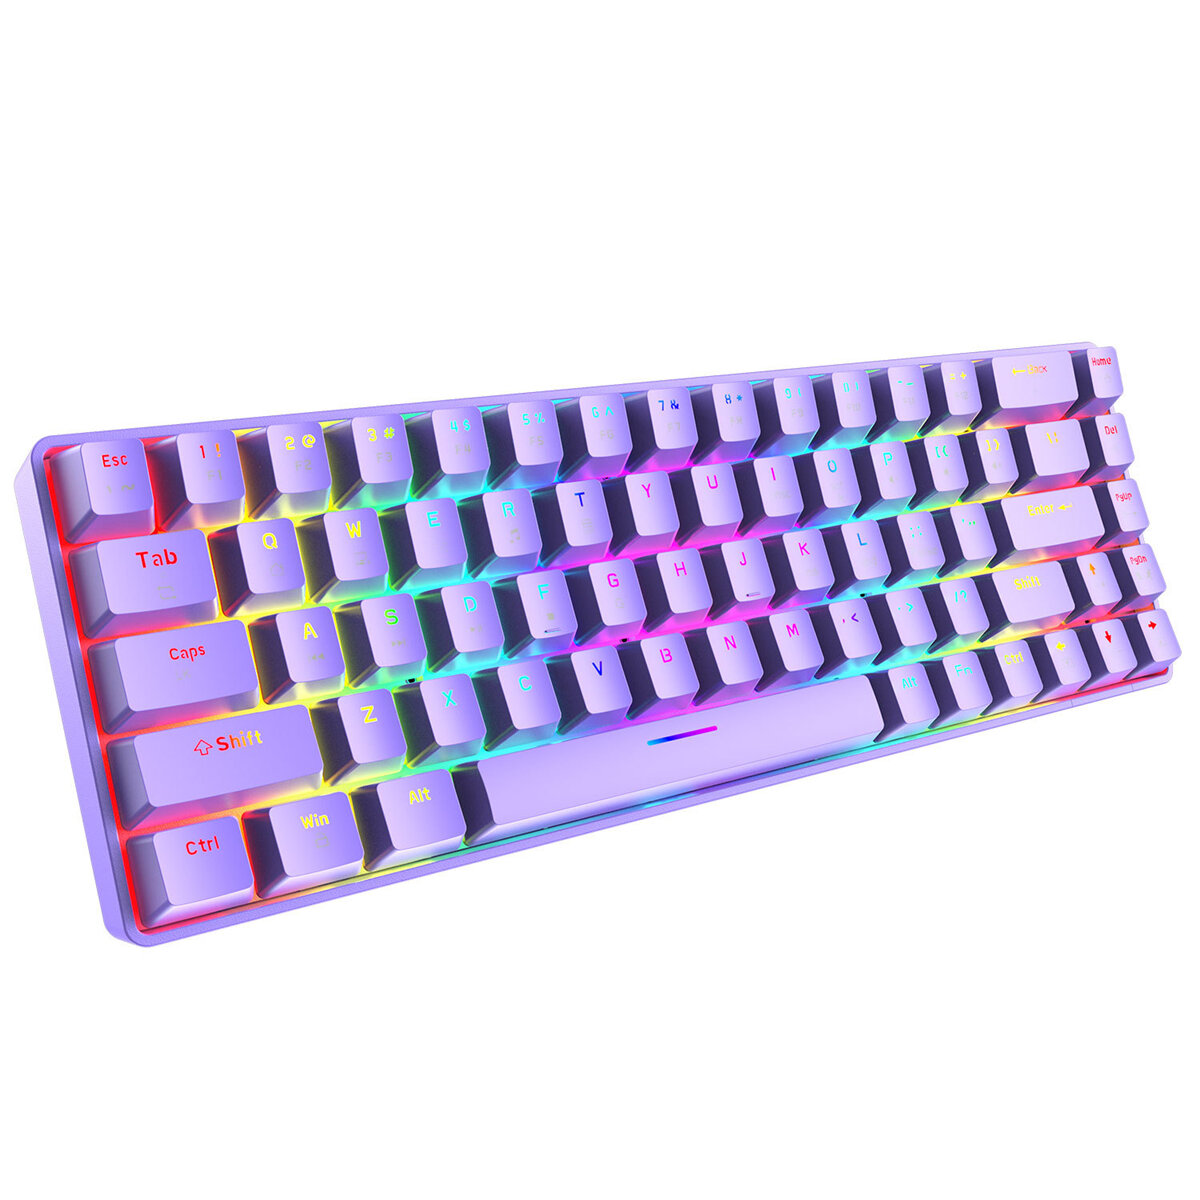 ZIYOULANG T8 Mechanical Keyboard 68 Keys USB Type-C Wired Blue/Brown/Red Swtich Colorful RGB Backlit